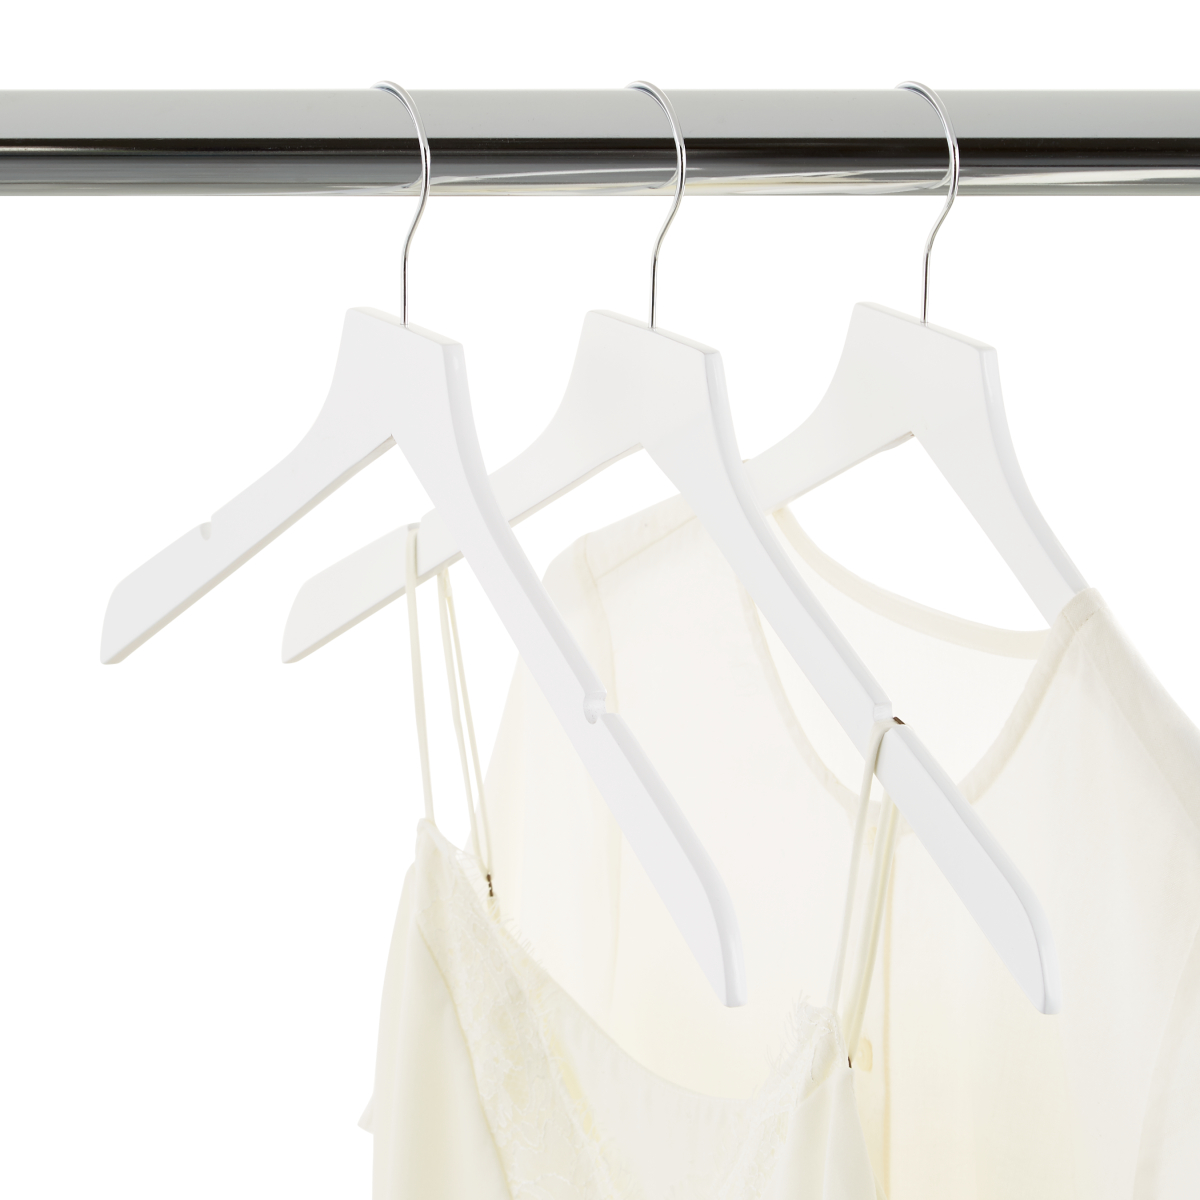 The Container Store Slim Wood Hangers with Notches